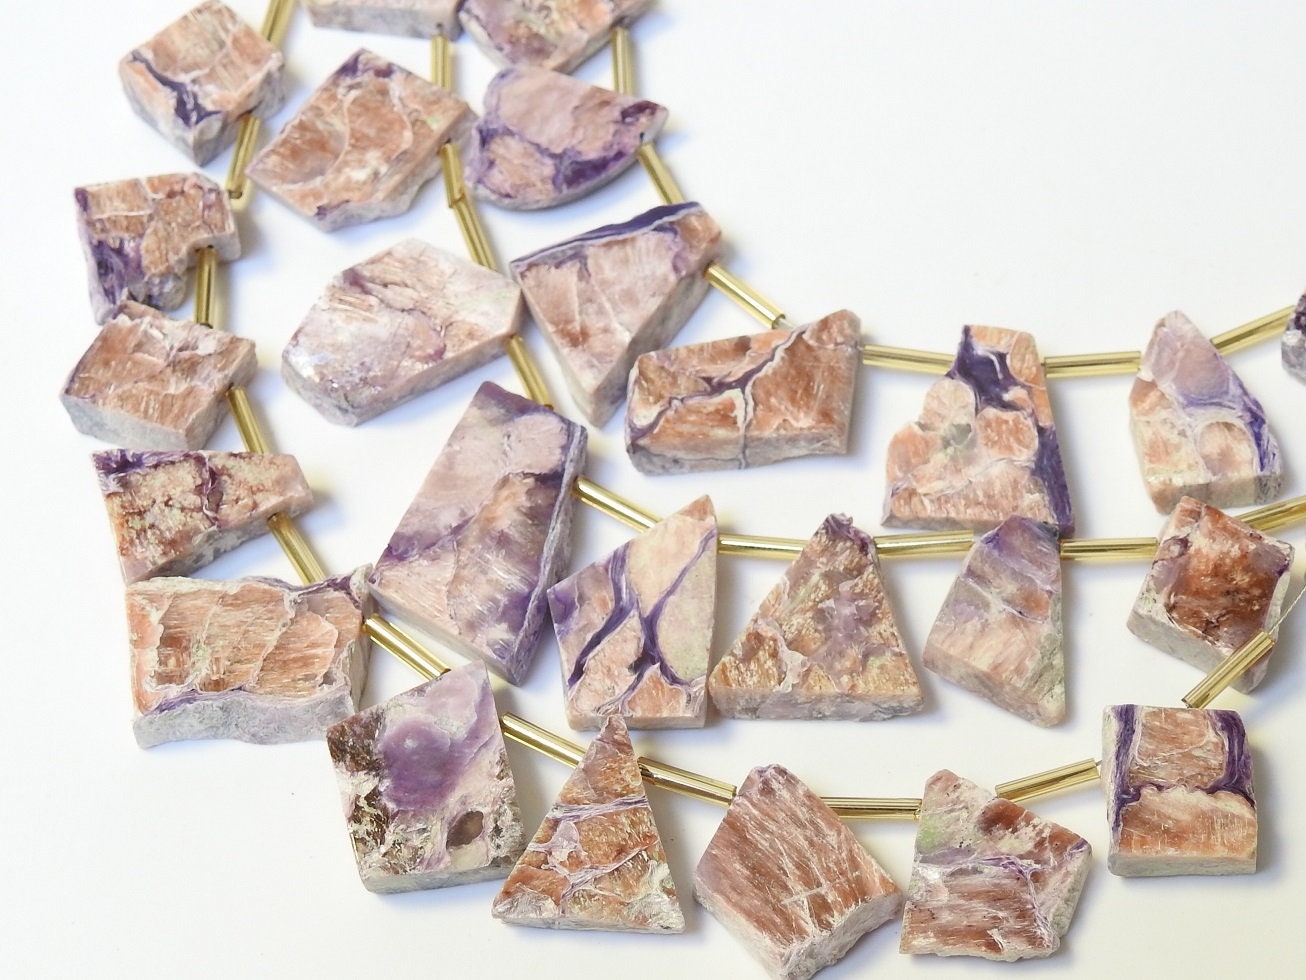 Charoite Polished Rough Slice,Slab,Stick,Loose Raw,11Pieces Strand 20X15To11X11MM Approx,Wholesaler,Supplies,100%Natural PME-R4 | Save 33% - Rajasthan Living 13